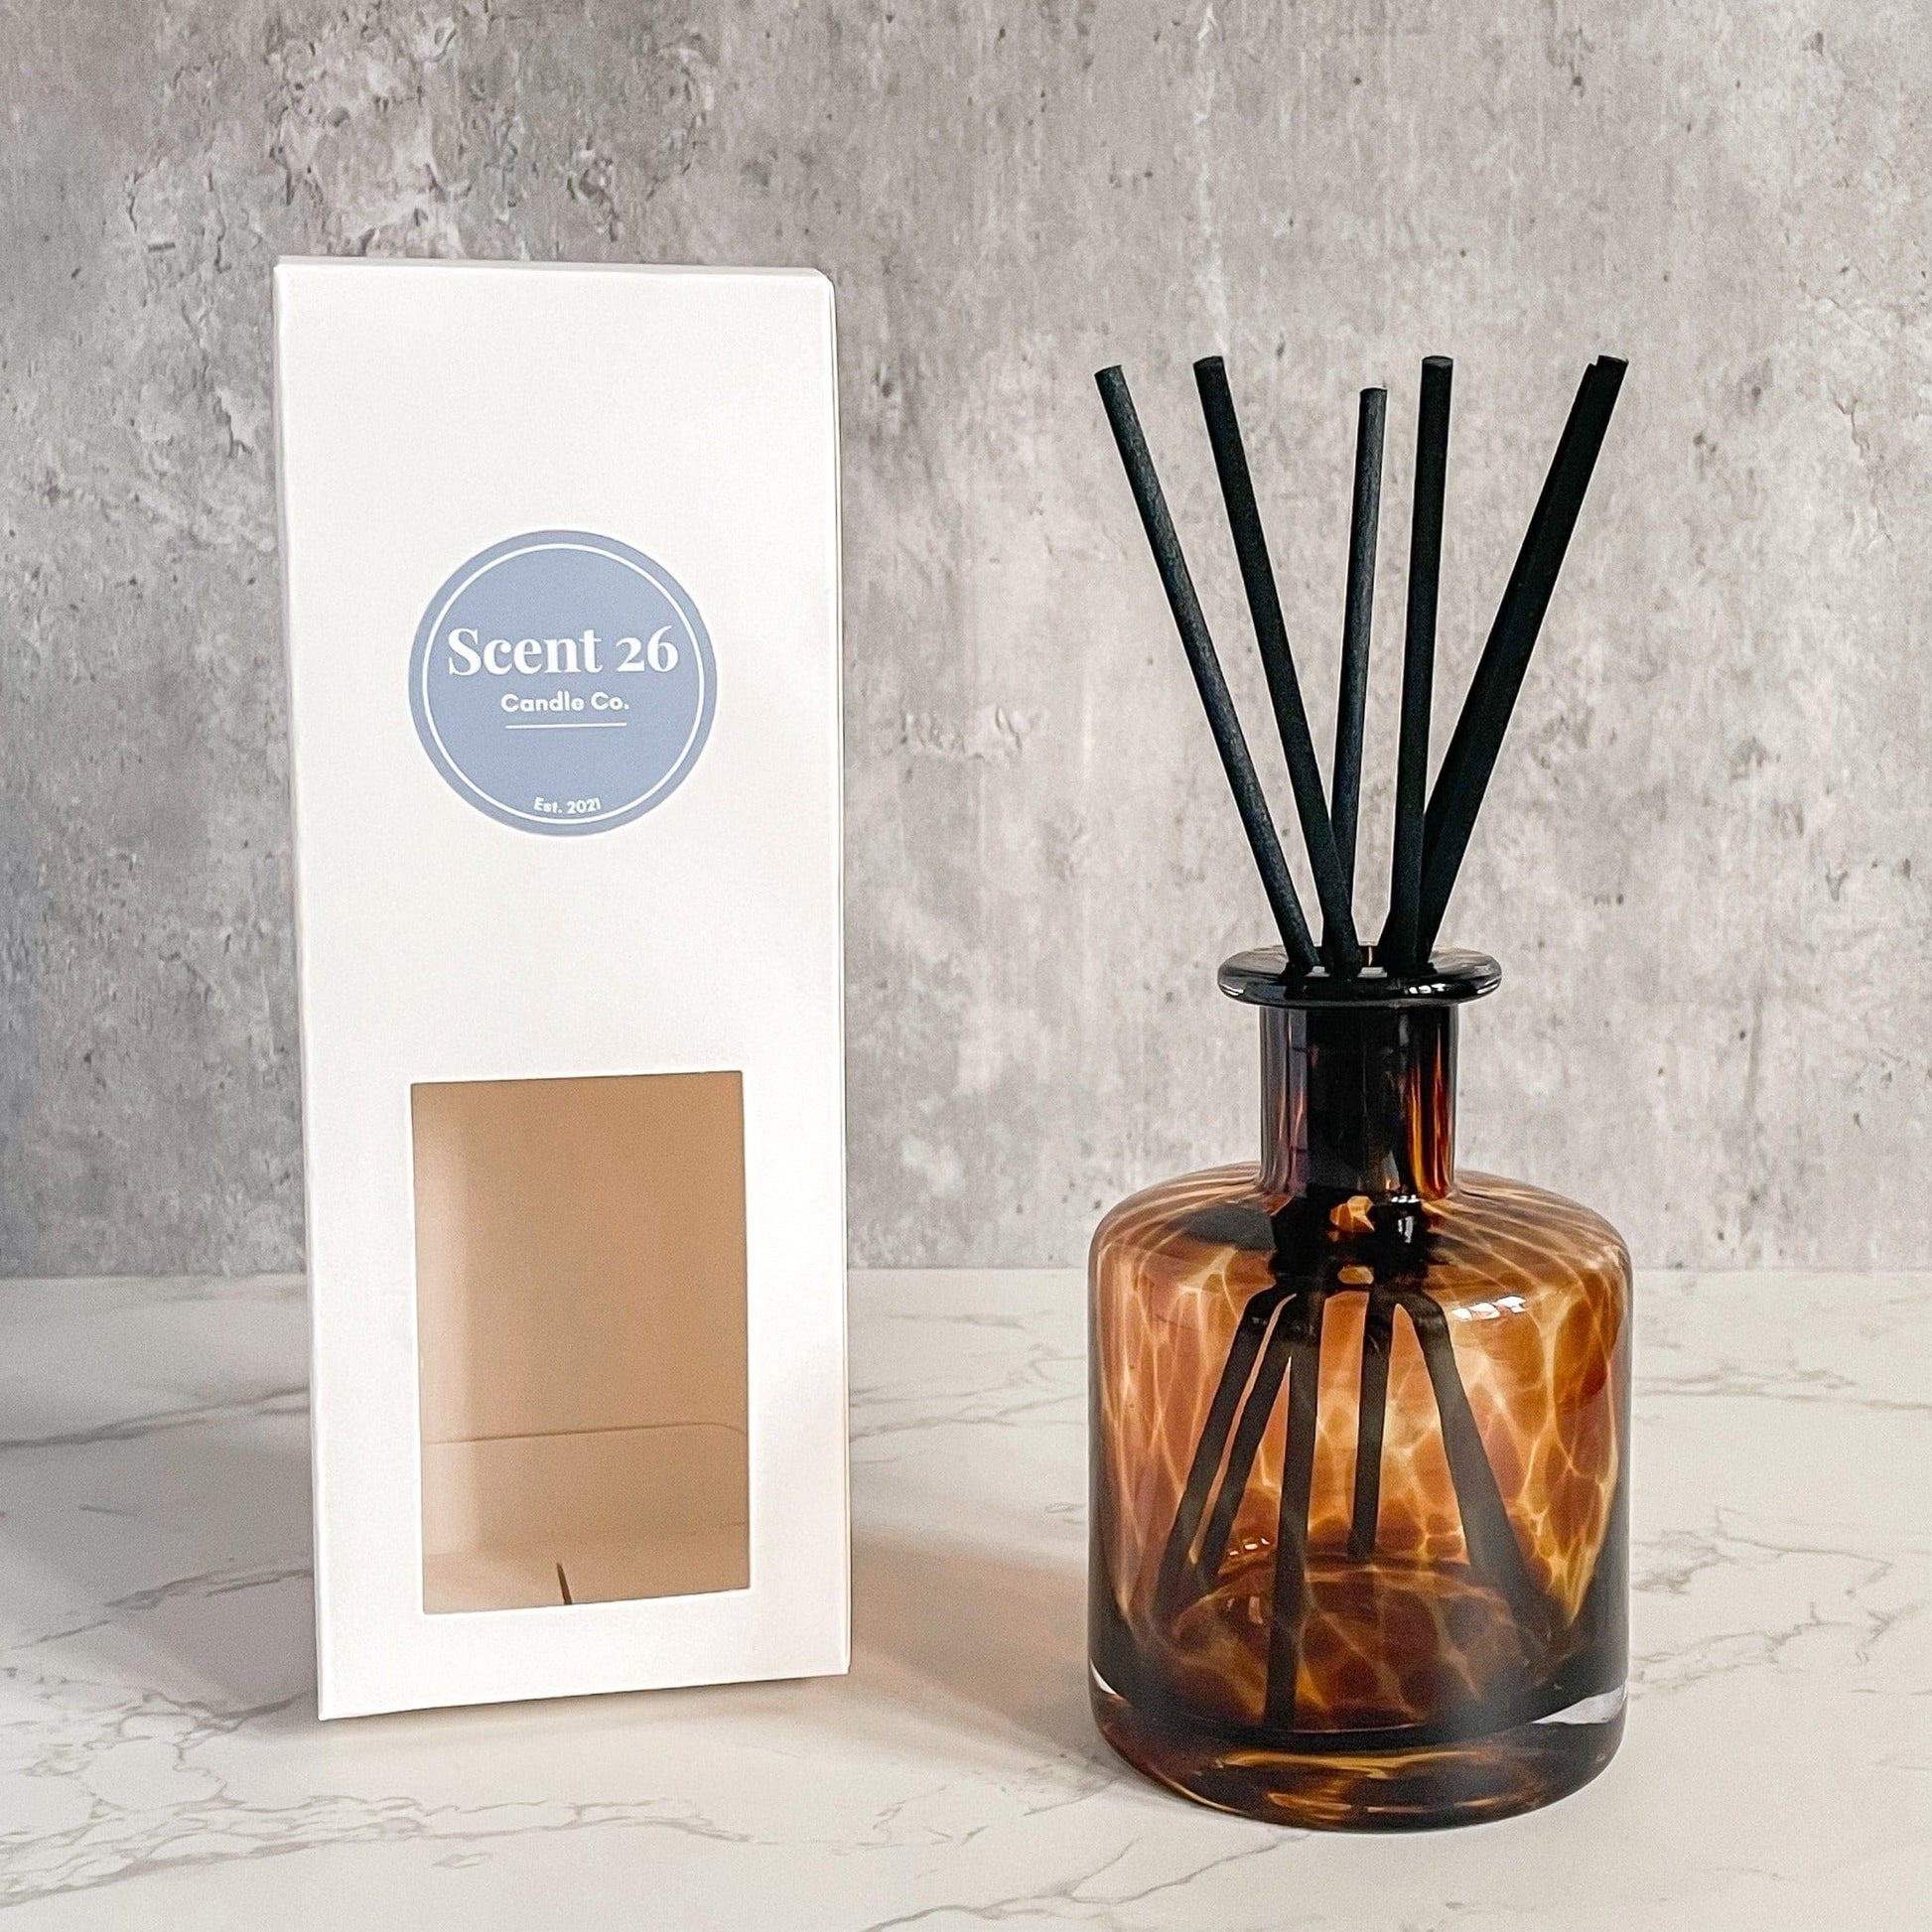 Scent 26 Candle Co. Air Fresheners Leopard Reed Diffuser | Gift Set | Dark Honey & Tobacco